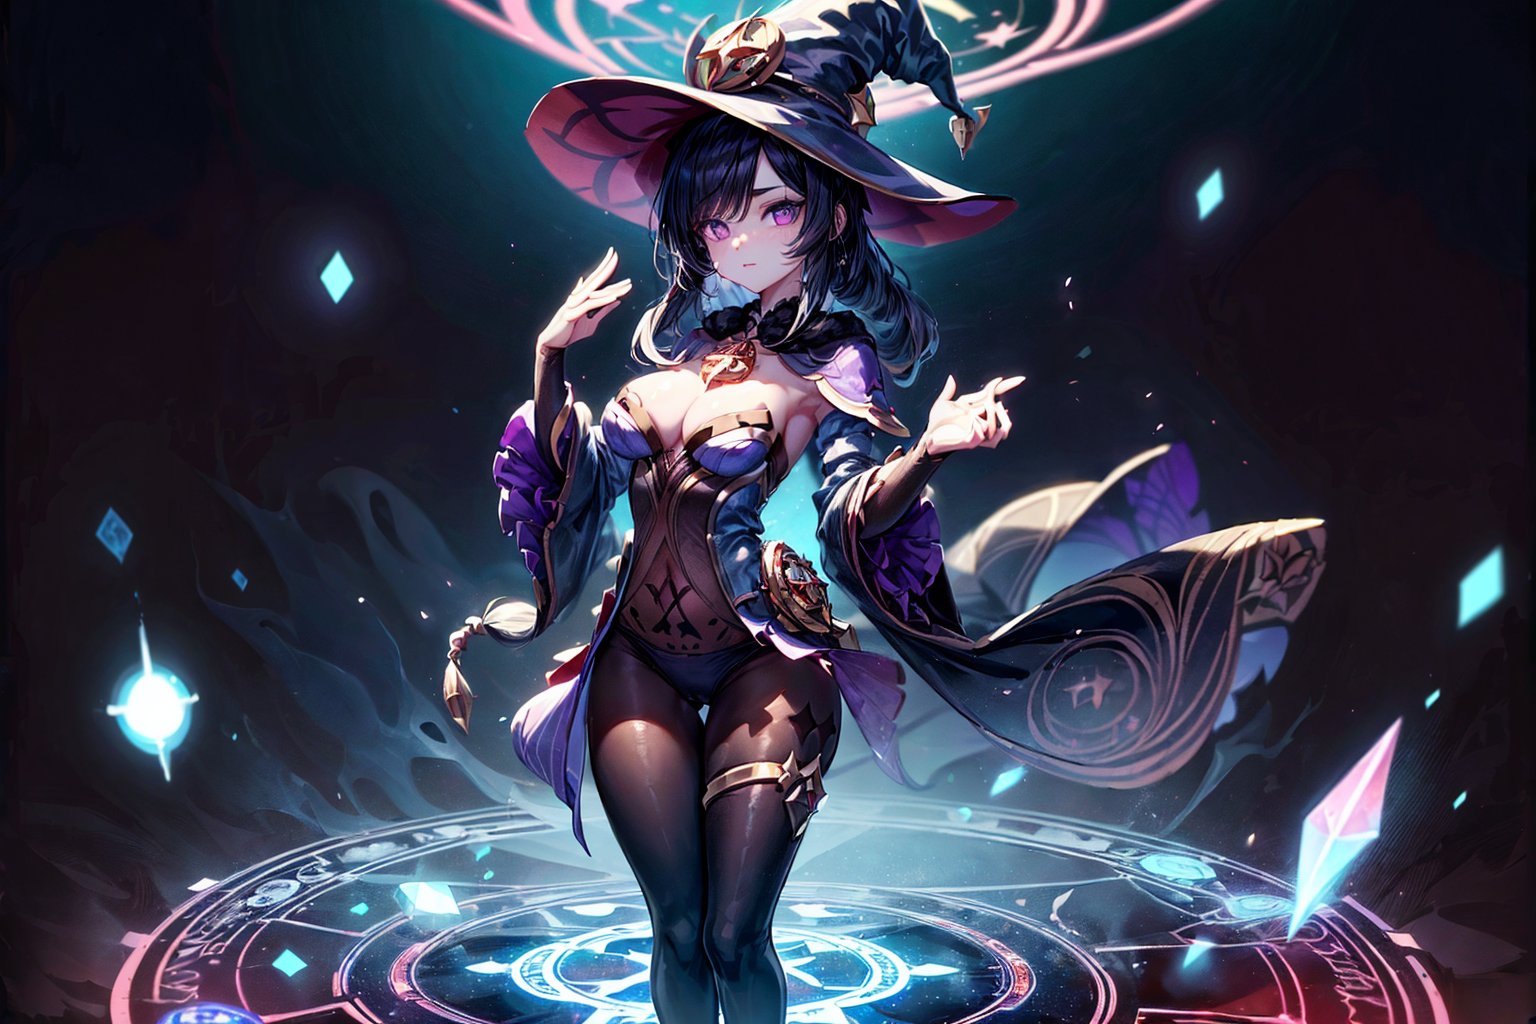 (((Standing in the middle of a magic circle lights around floating hair flying, invoking magic))), moonlight, (((long black-hair))), ((light purple eyes)), ((1 sexy girl)), large breasts, best quality, extremely detailed, HD, 8k, 1girl, background forest darkness with lights, mona_(genshin_impact), background high detailed, mona_(genshin_impact), with magic hat, witches_hat, hair highest detailed, flower and lefts around, loose hair, eyes detailed, eyes highest detailed, eyes perfect, face with detailed, face beautiful ,glitter,more detail, full_body, body complete , hands detailed, panty_hose dark with details golden